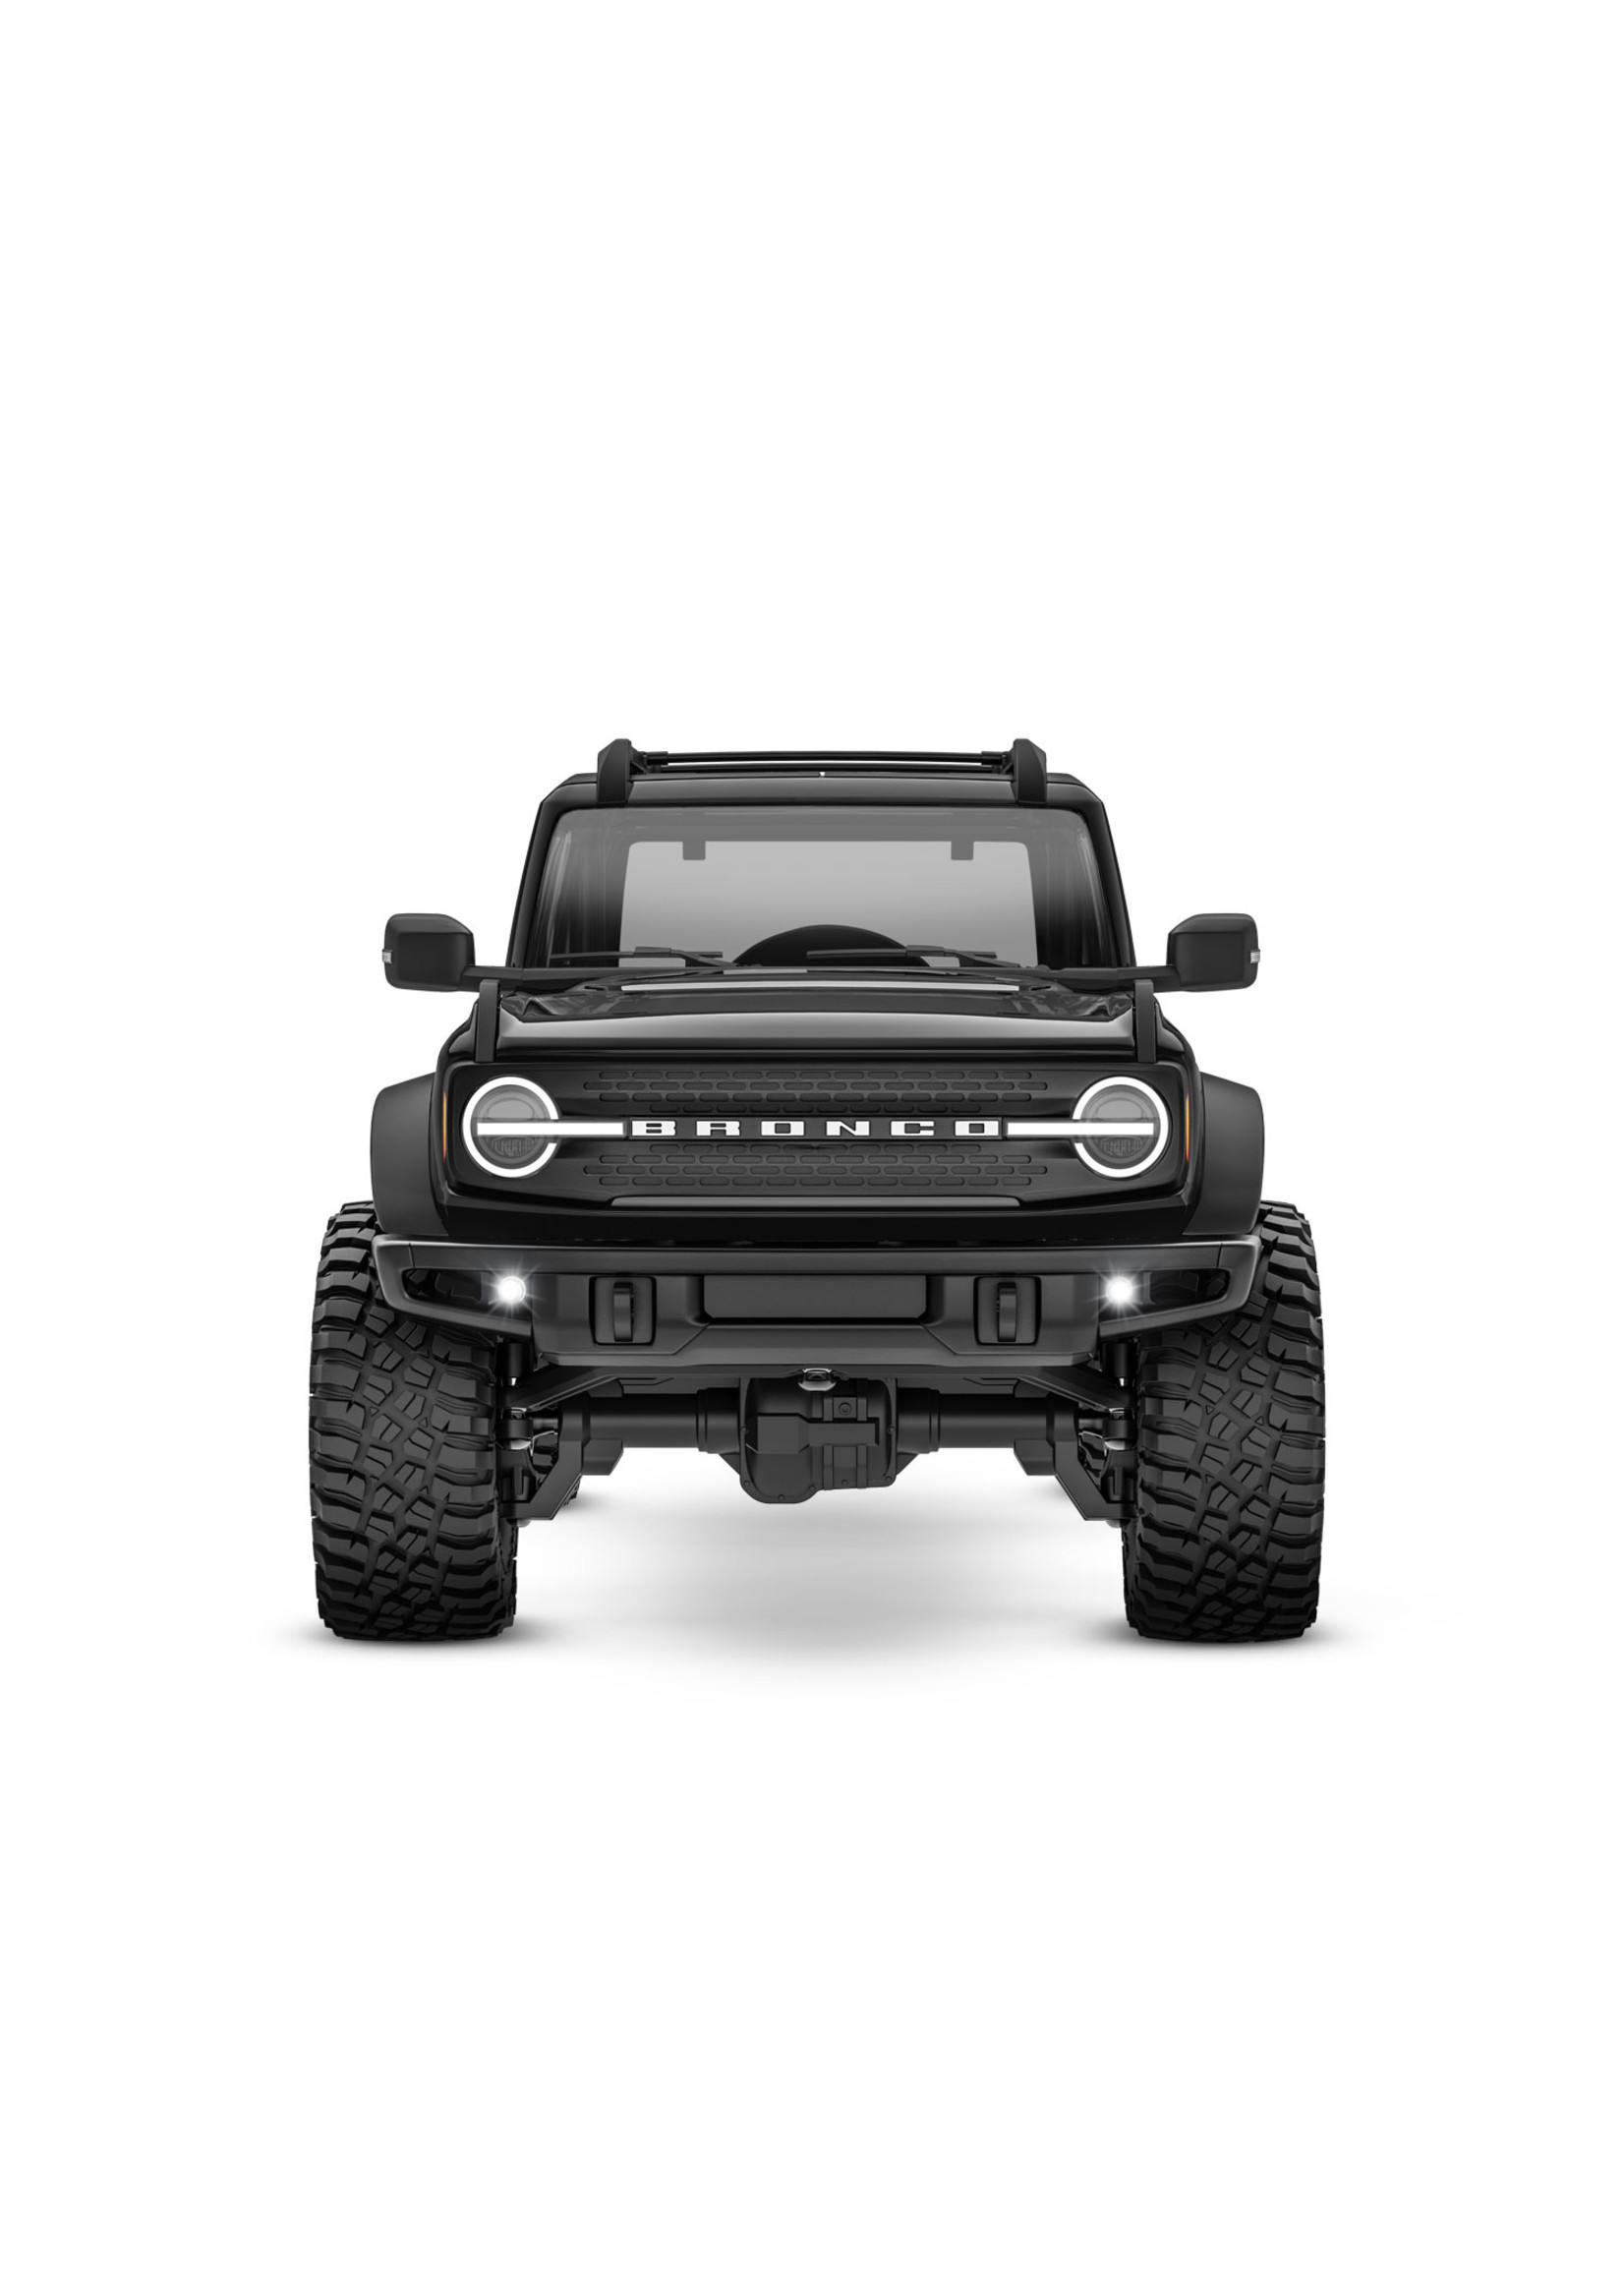 Traxxas 970741BLK - 1/18 RTR Scale and Trail Bronco - Black